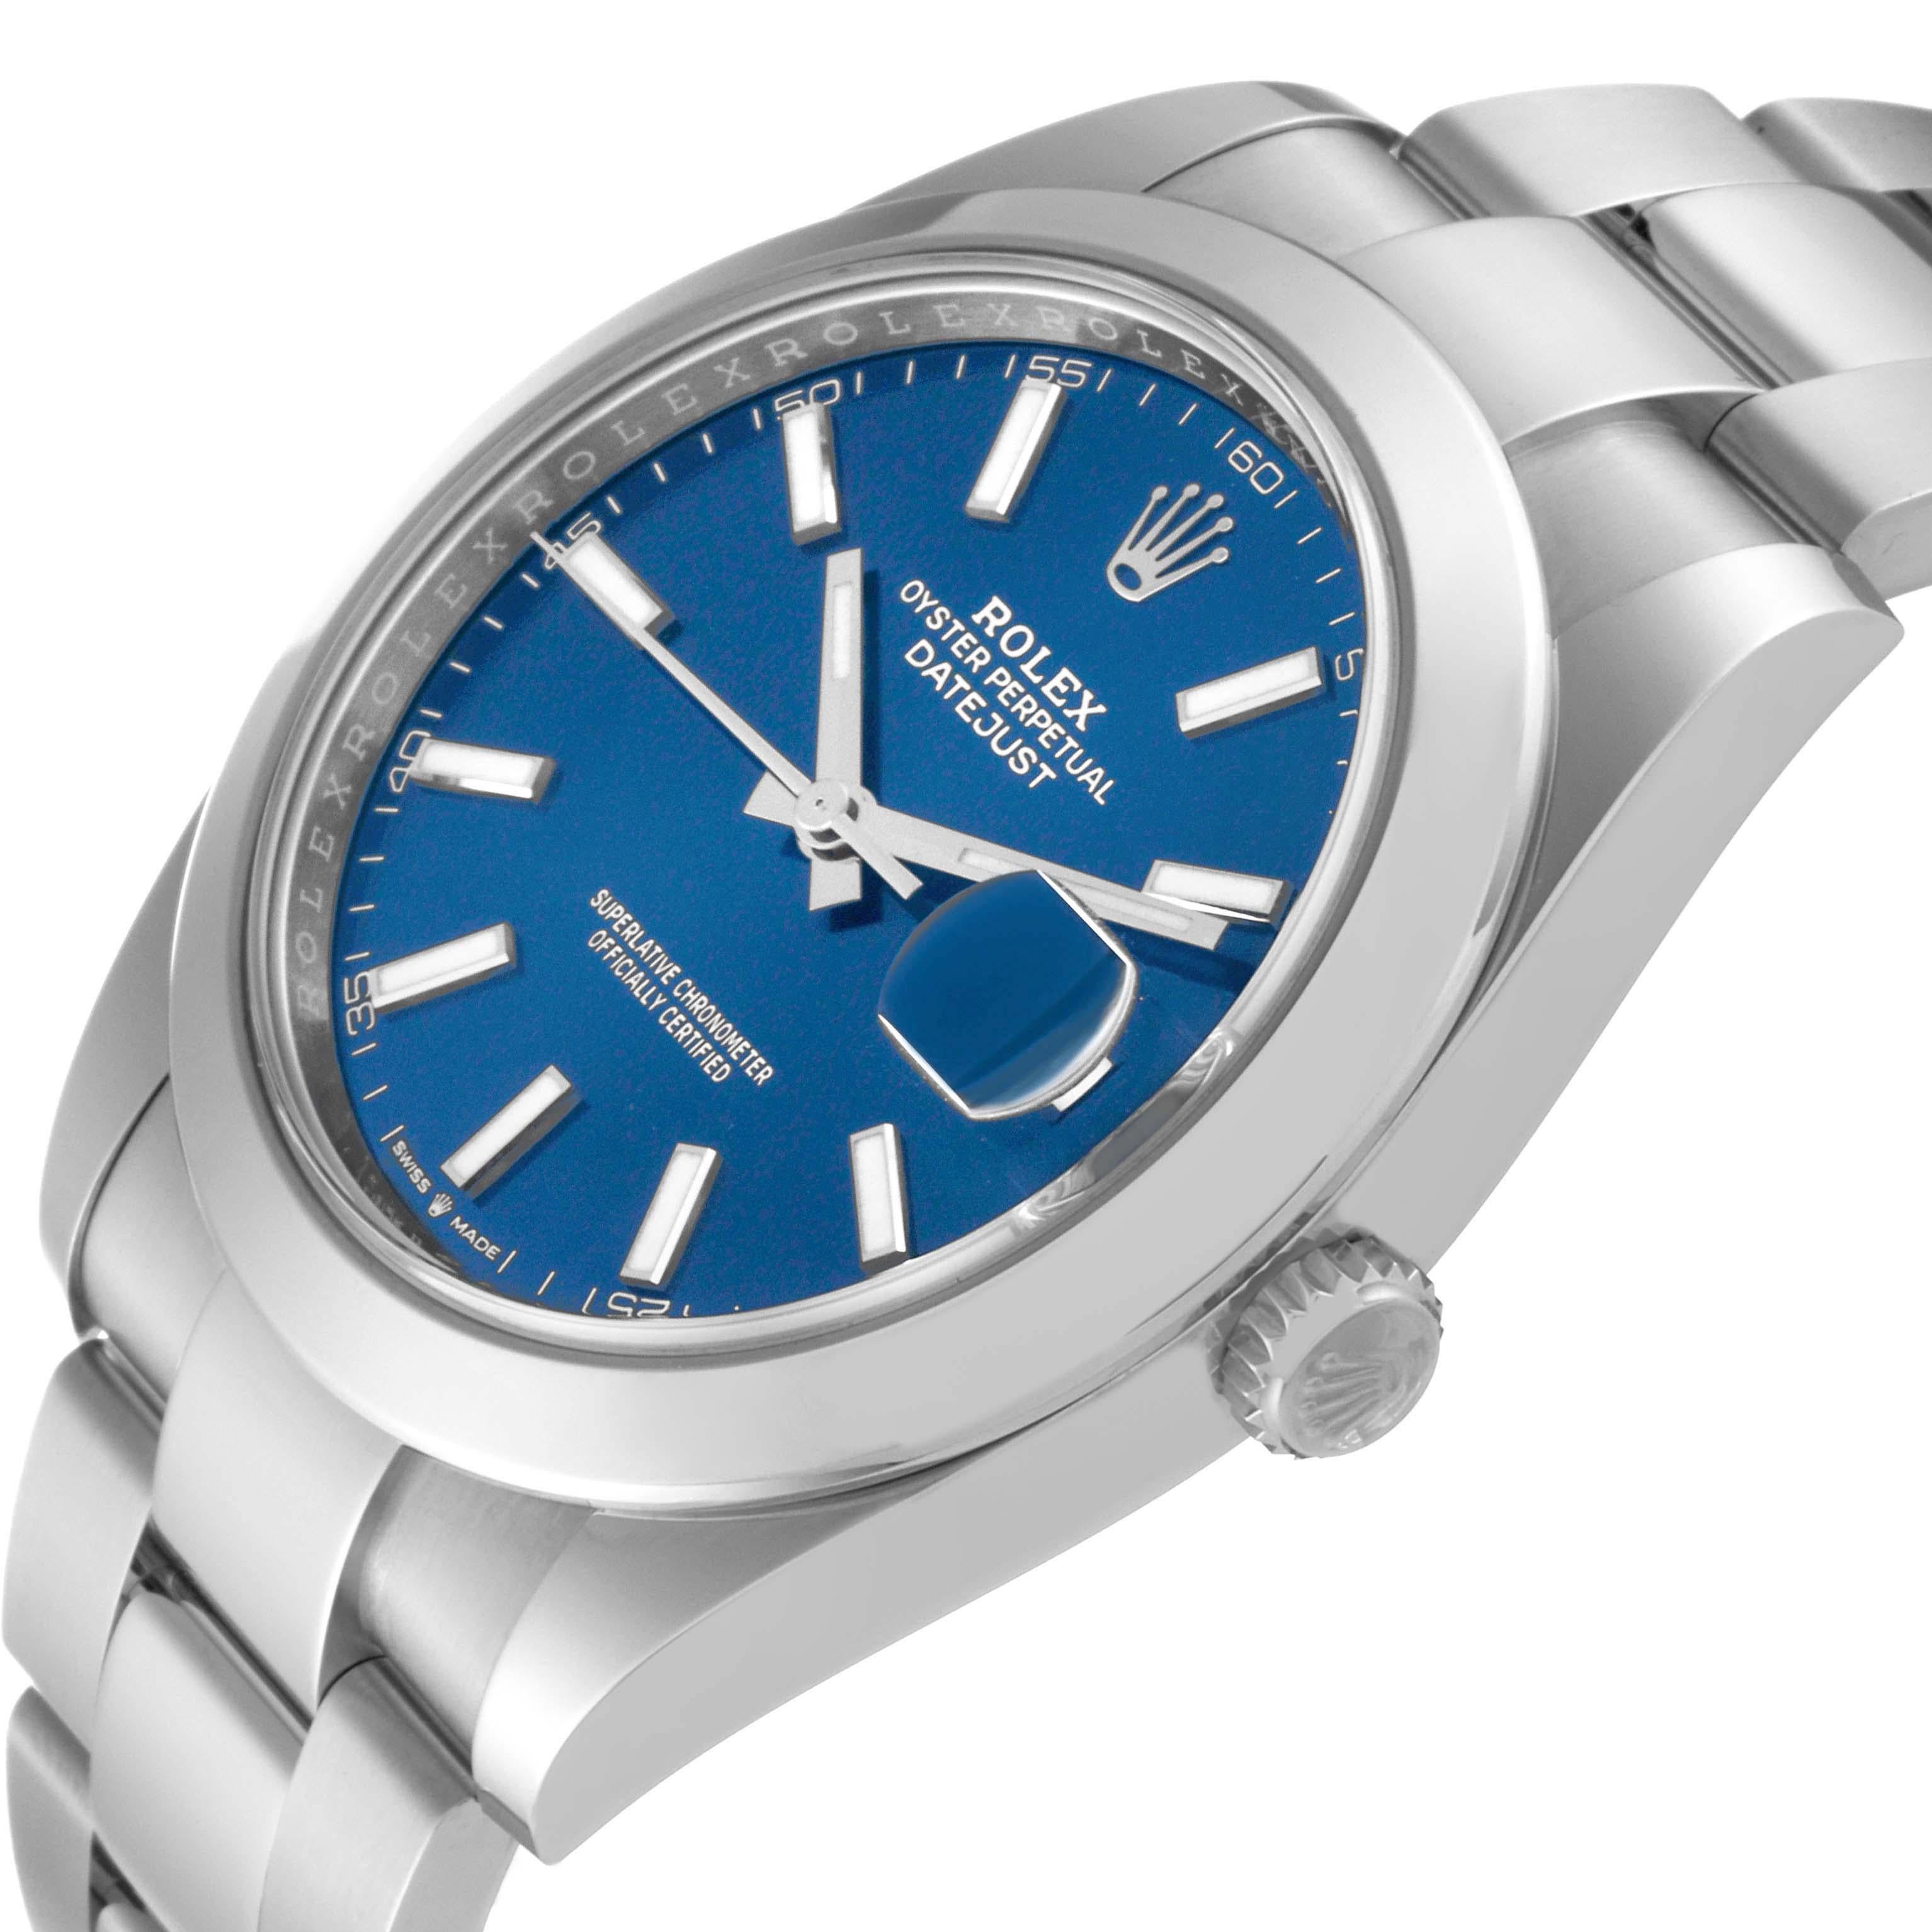 Men's Rolex Datejust 41 Blue Dial Smooth Bezel Steel Mens Watch 126300 Box Card For Sale